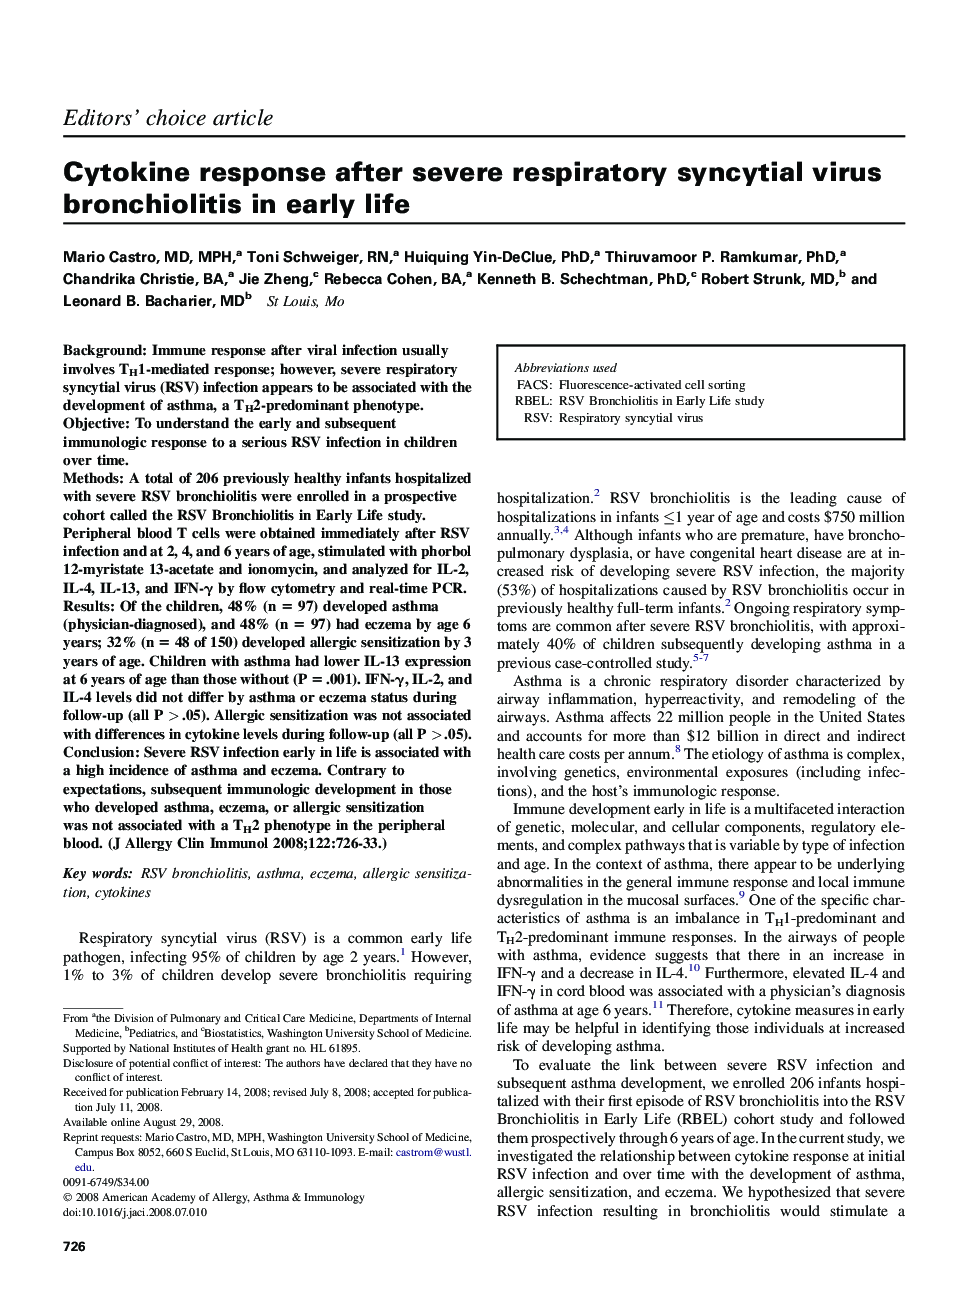 Cytokine response after severe respiratory syncytial virus bronchiolitis in early life